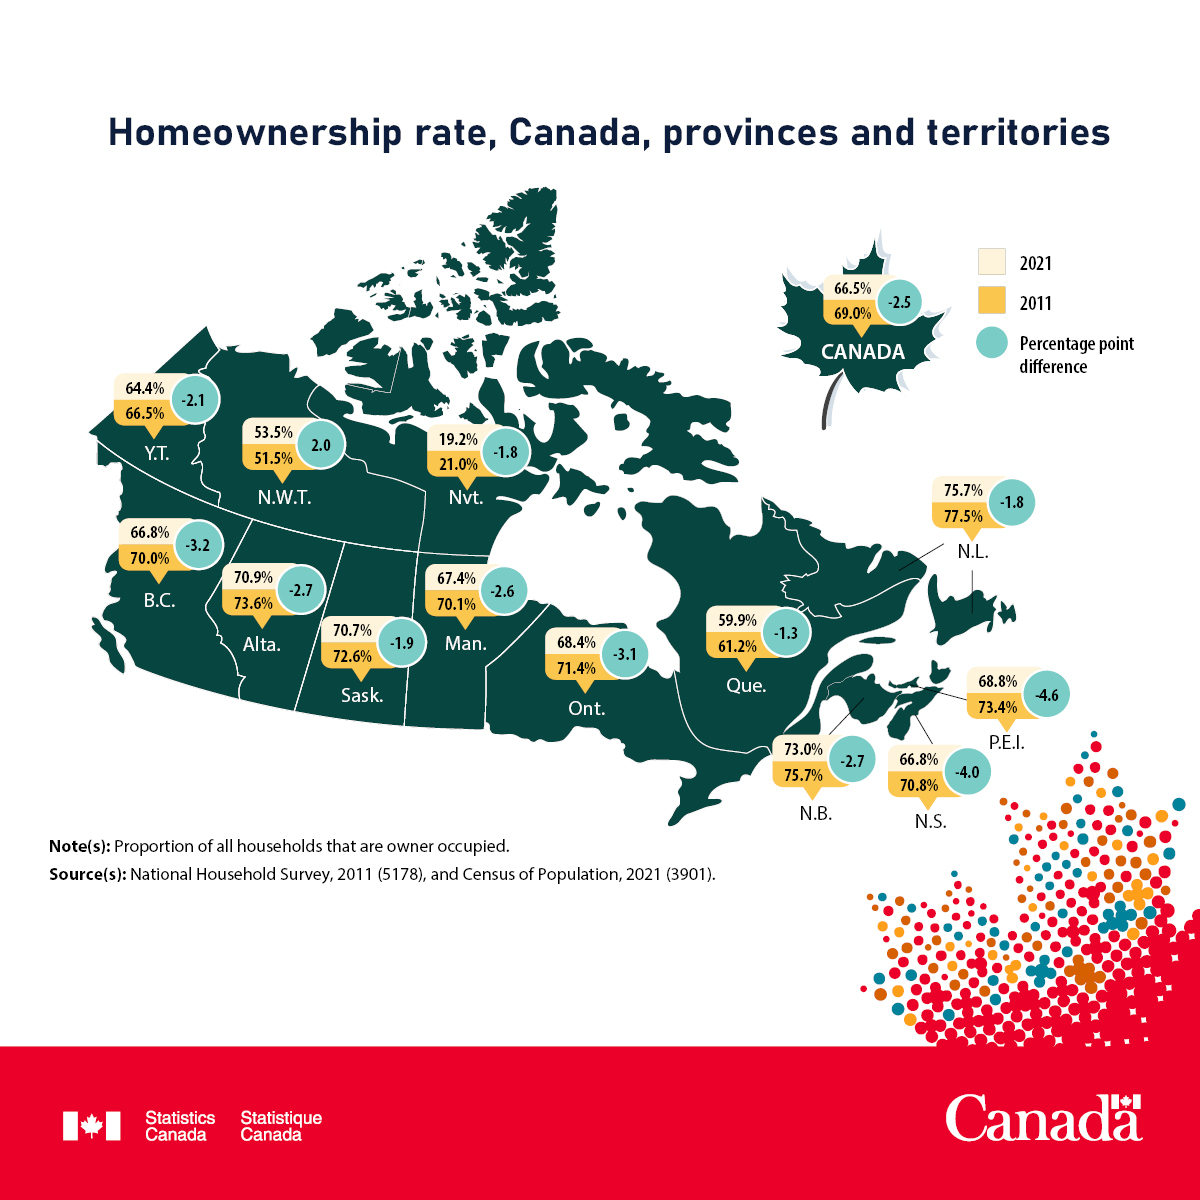 Post 2 image - Homeownership rate, Canada, provinces and territories